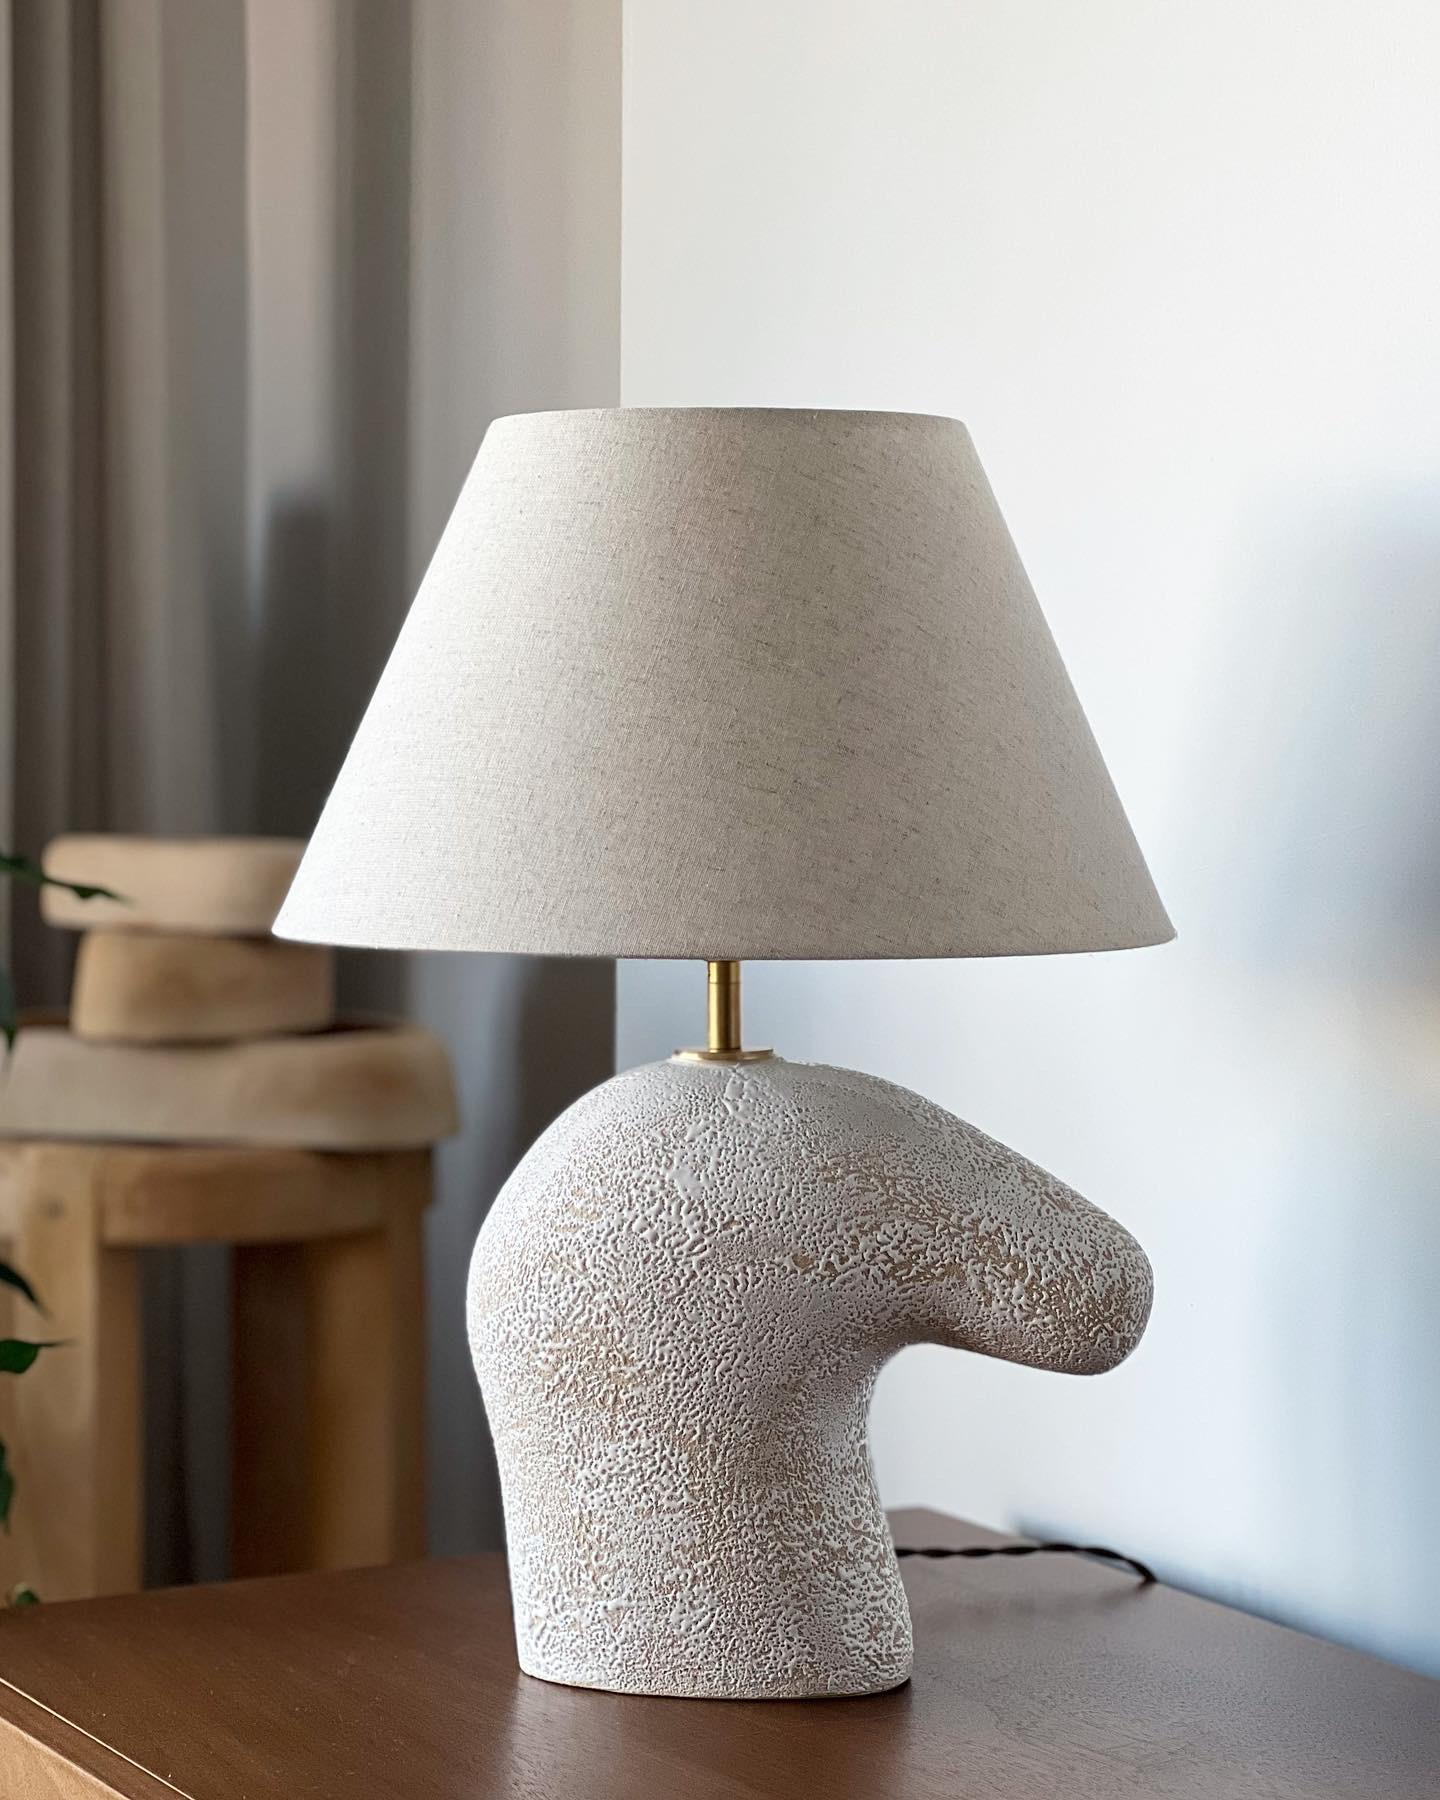 Tota Lampshade by Güler Elçi
Dimensions: W 25.4 x D 15.2 x H 47 cm.
Materials: Stoneware Ceramic, Linen, Unfinished Brass.

Güler Elçi is a ceramic artist based in Istanbul. In the light of her engineering career, she considers ceramics as a